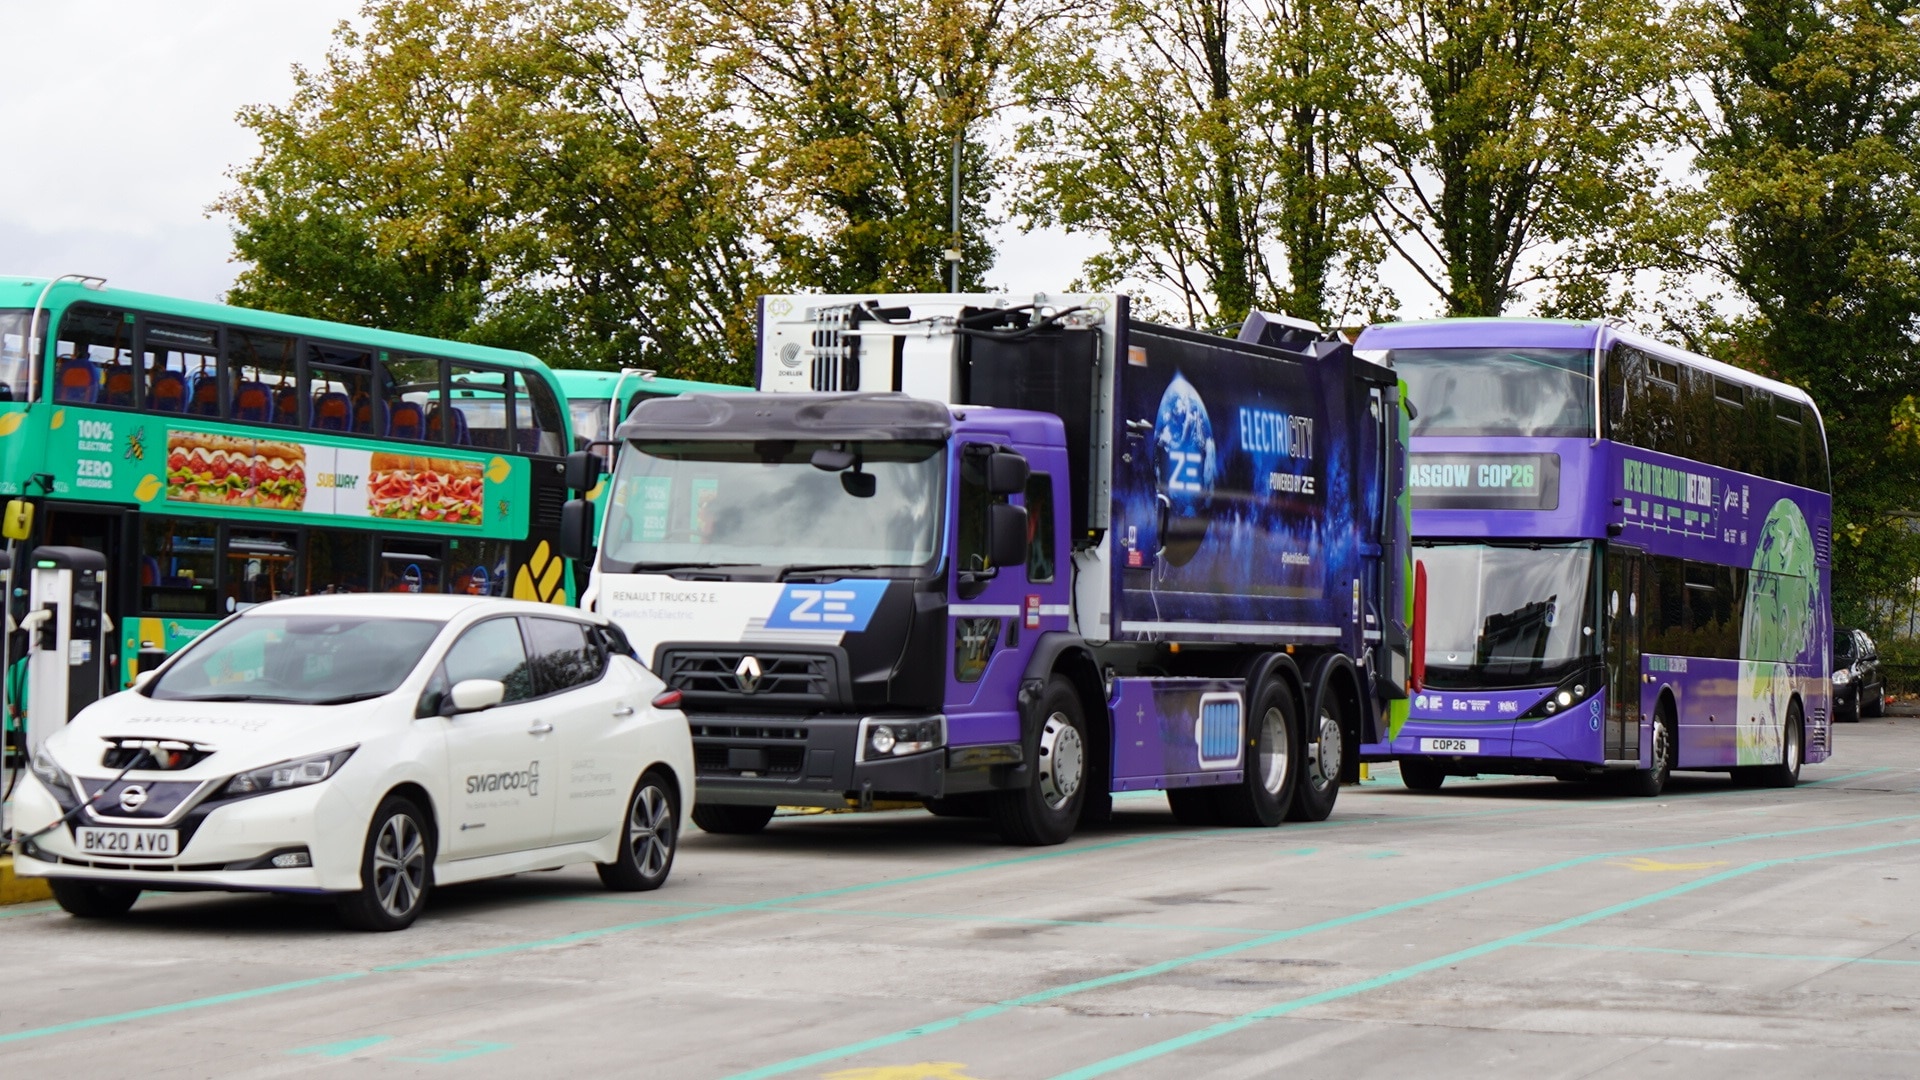 SSE and Swarco want bus charging infrastructure opened to other businesses